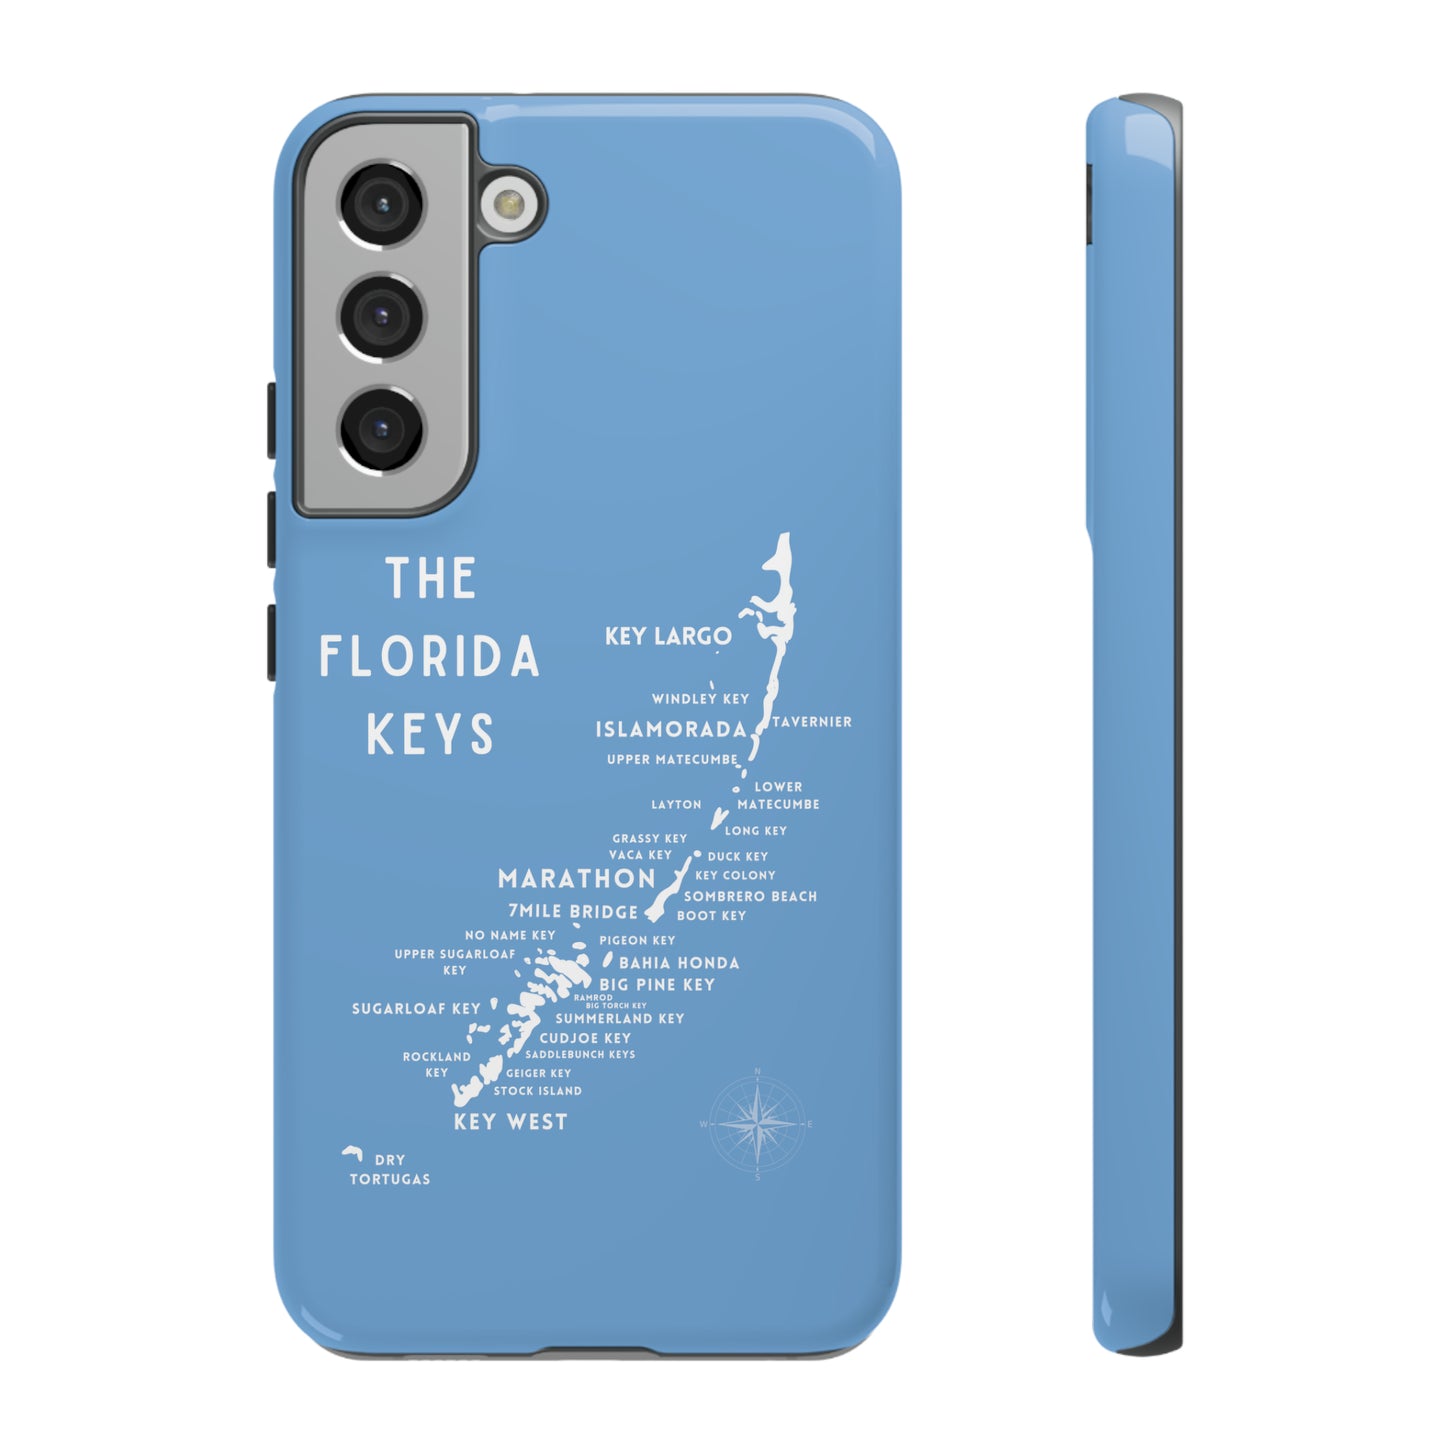 Florida keys map - iPhone Samsung pixel phone Case blue with white